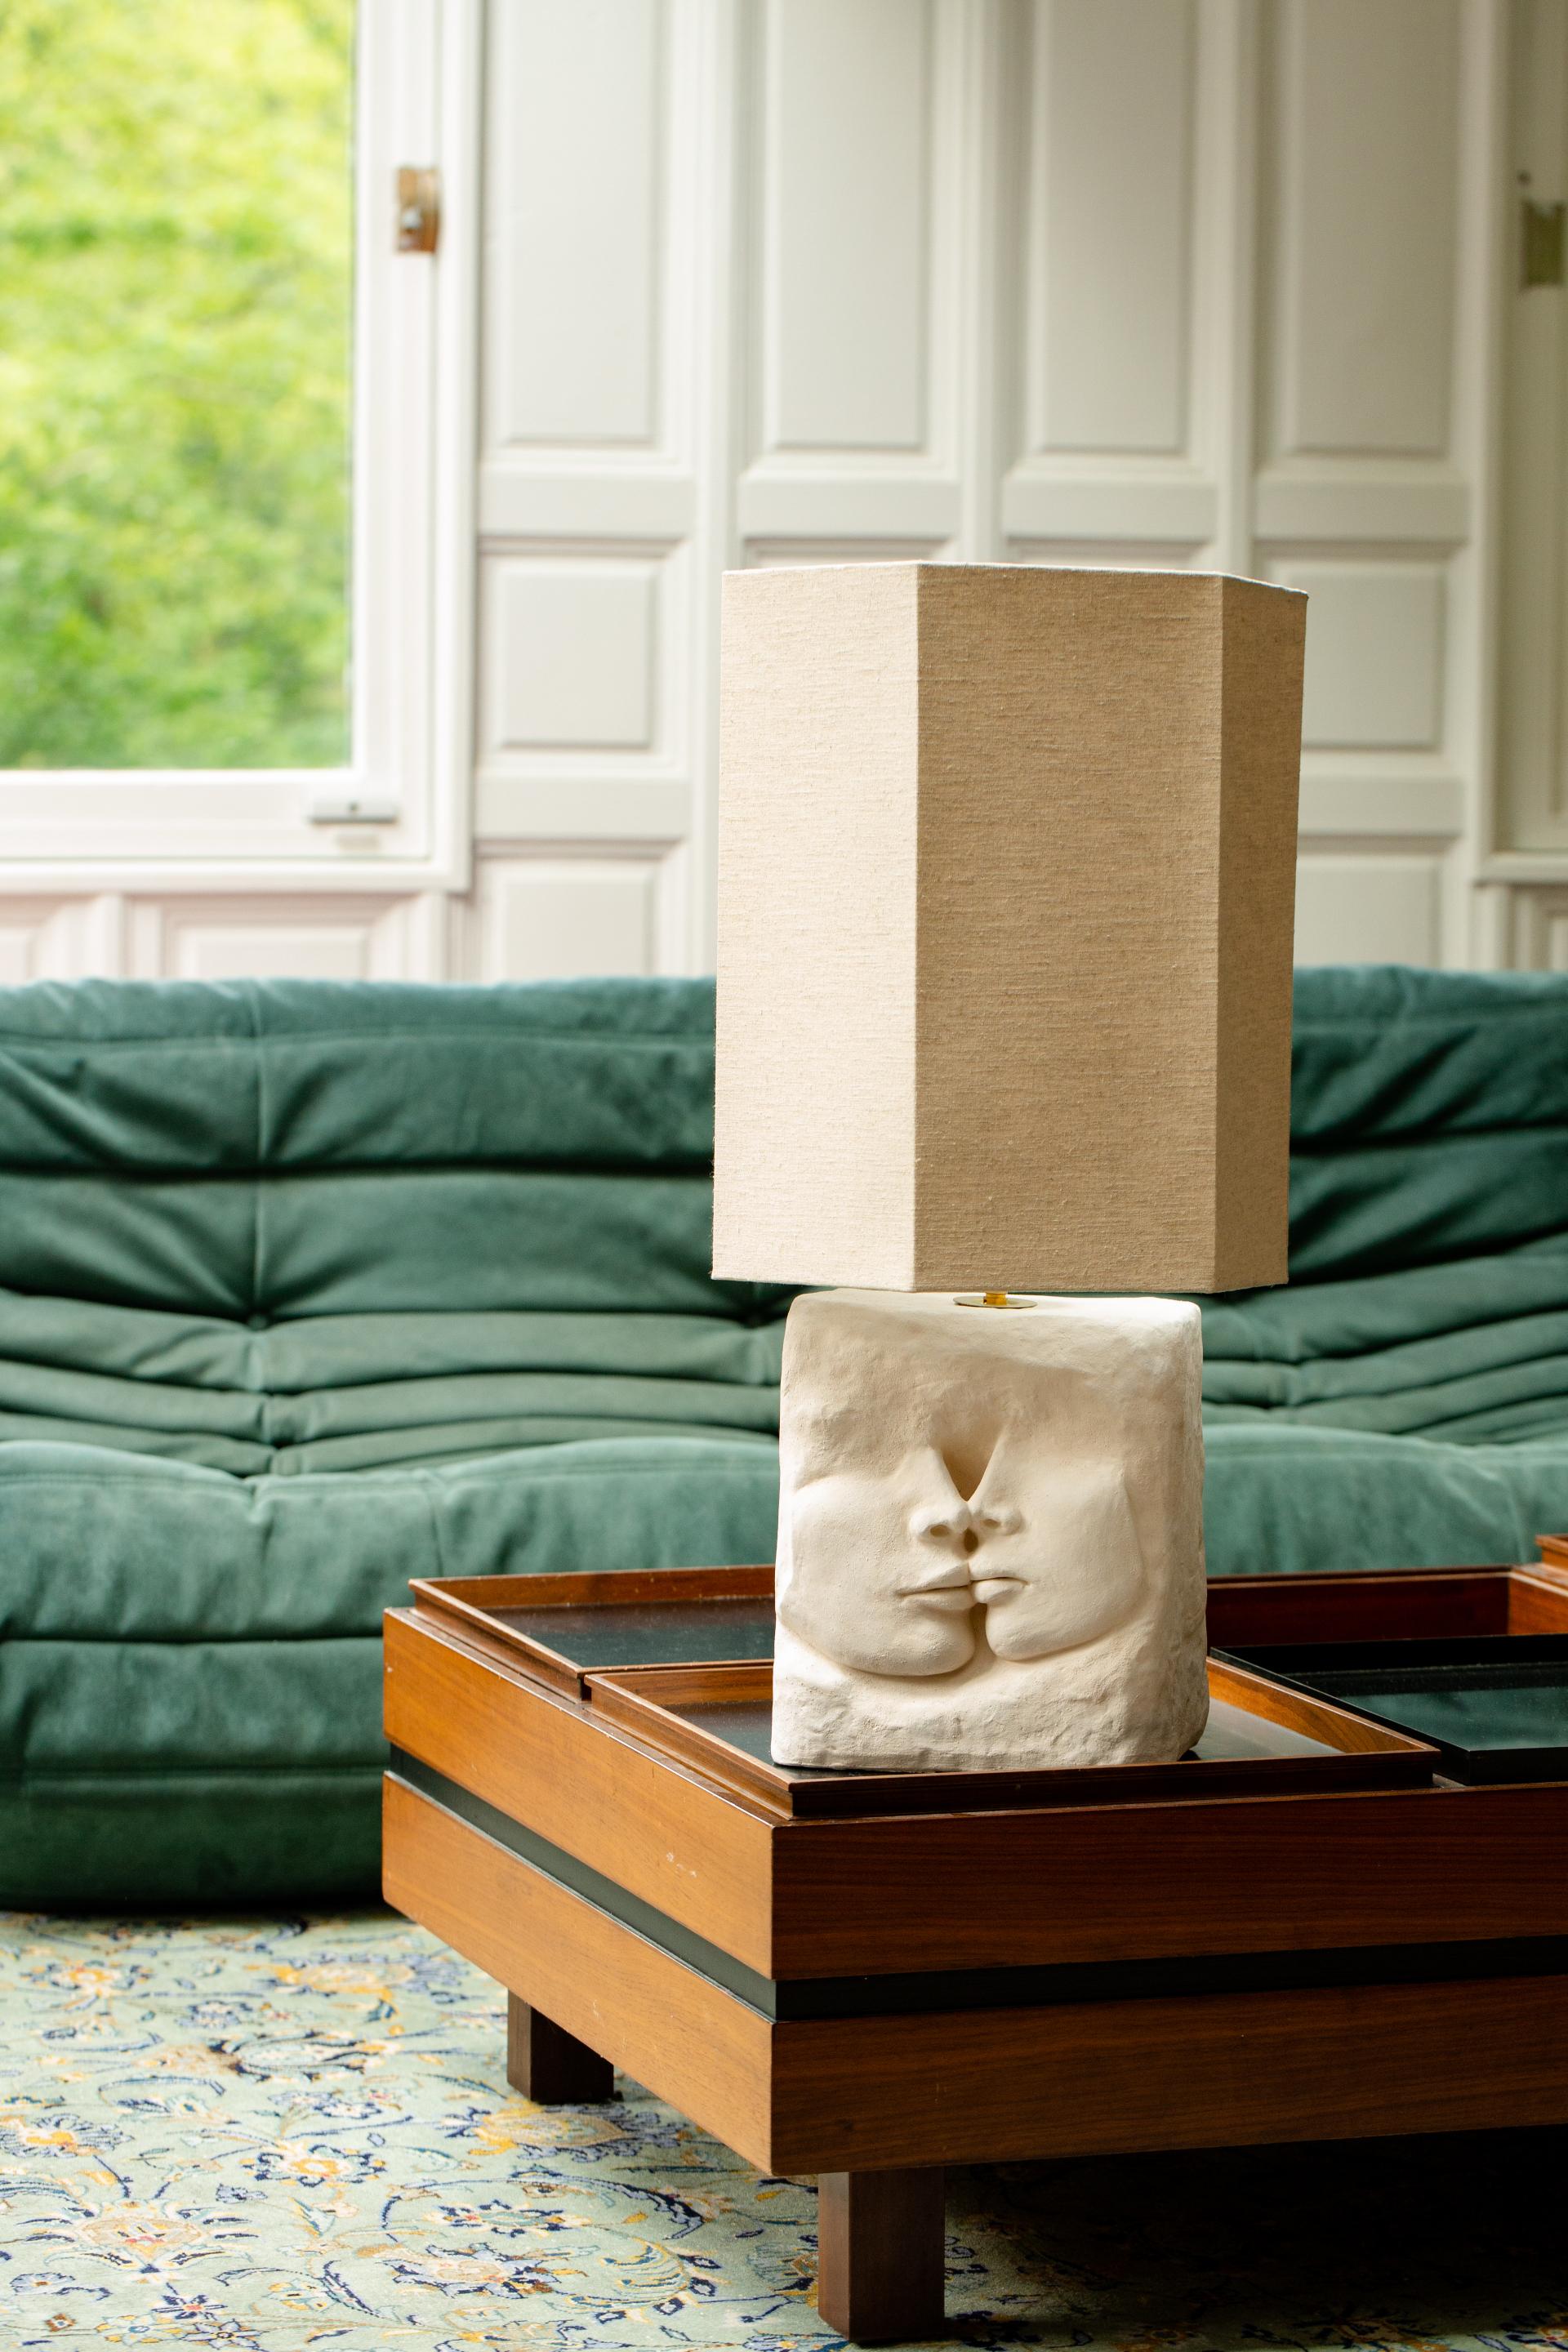 Le Baiser Table Lamp by Di Fretto
Dimensions: W 25 x D 15 x H 30 cm (measure without lampshade)
Materials: White Faience (not glazed / without the lampshade)

Lampshade - On Demand

The Le Baiser table lamp, when bas relief becomes a source of light